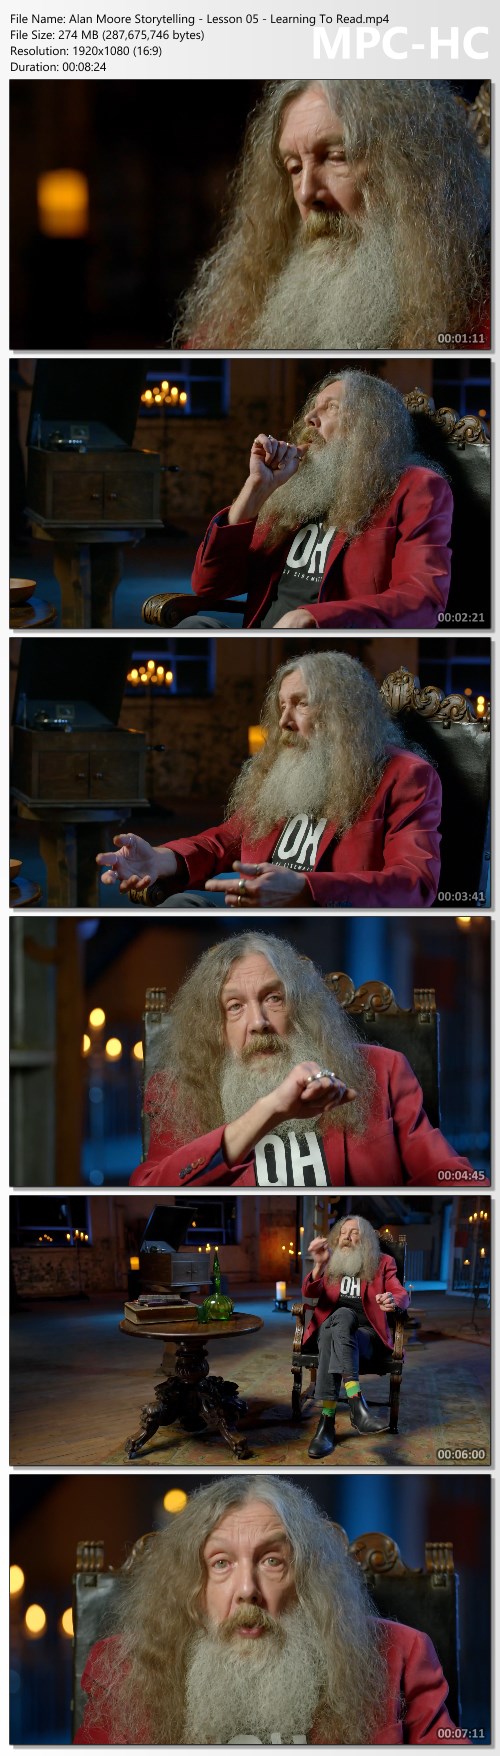 BBC Maestro - Alan Moore - Storytelling Online Course